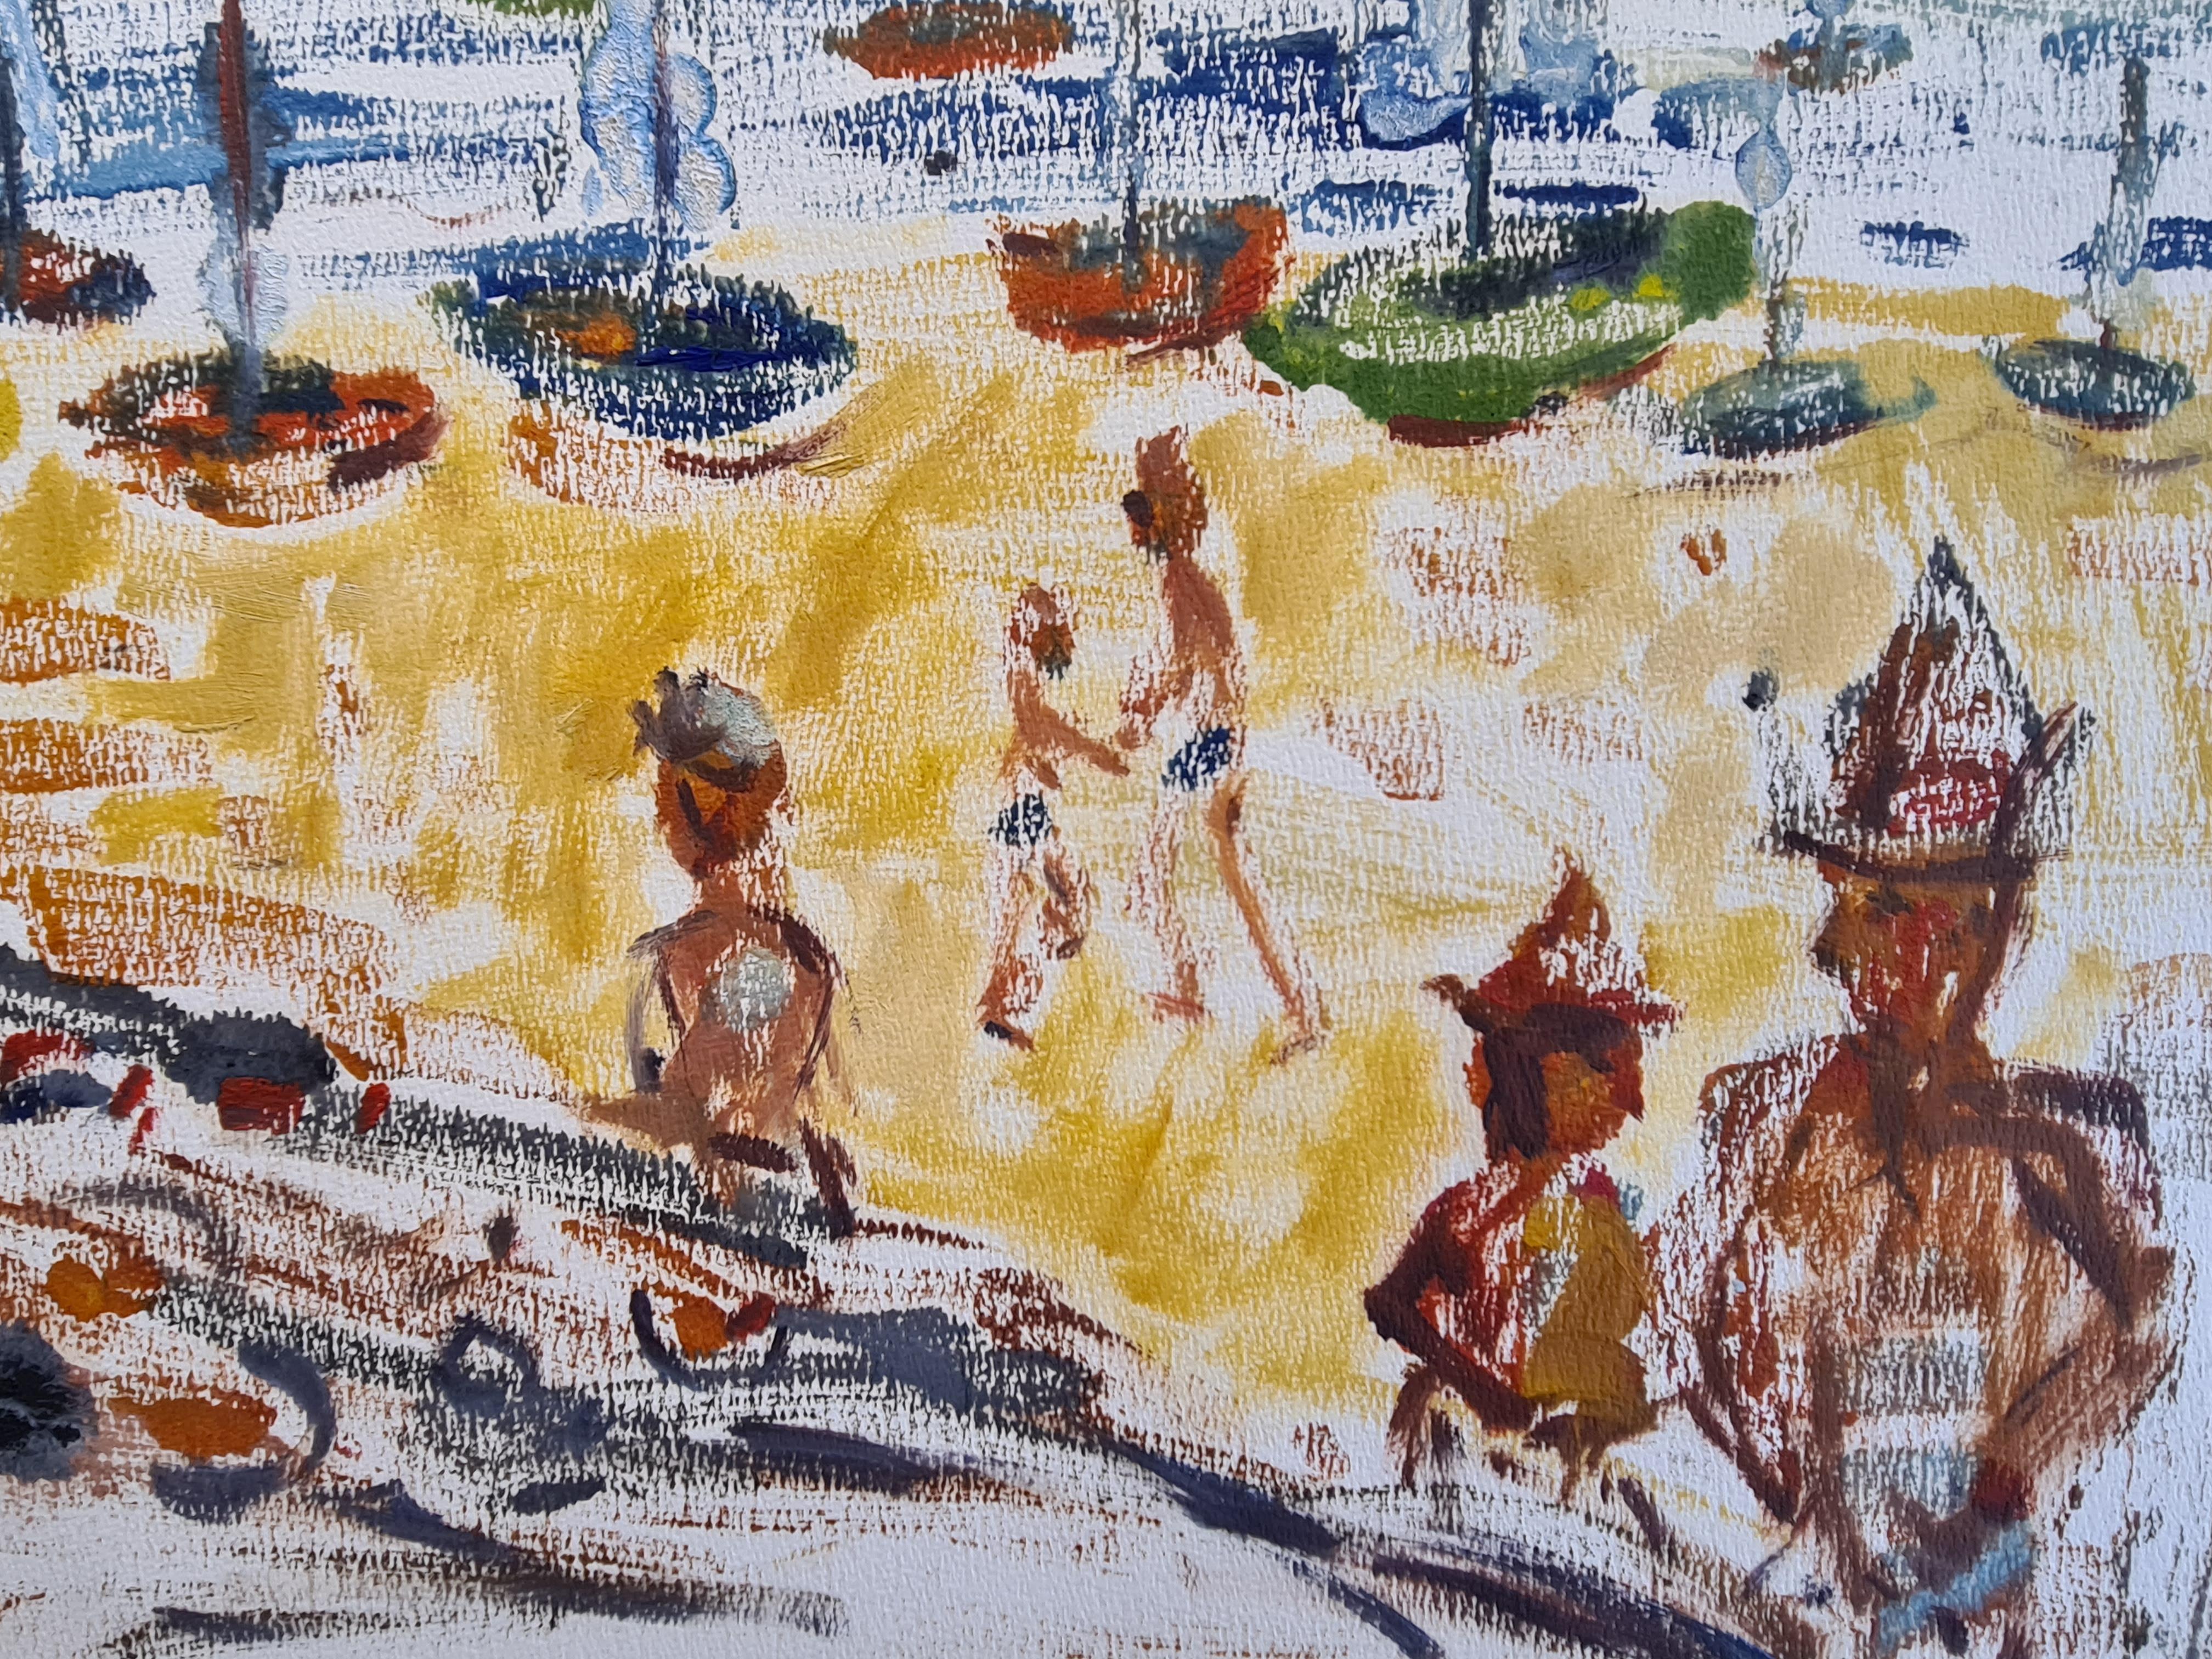 Sailing, Day at the Beach - Expressionist Art by André Pierard